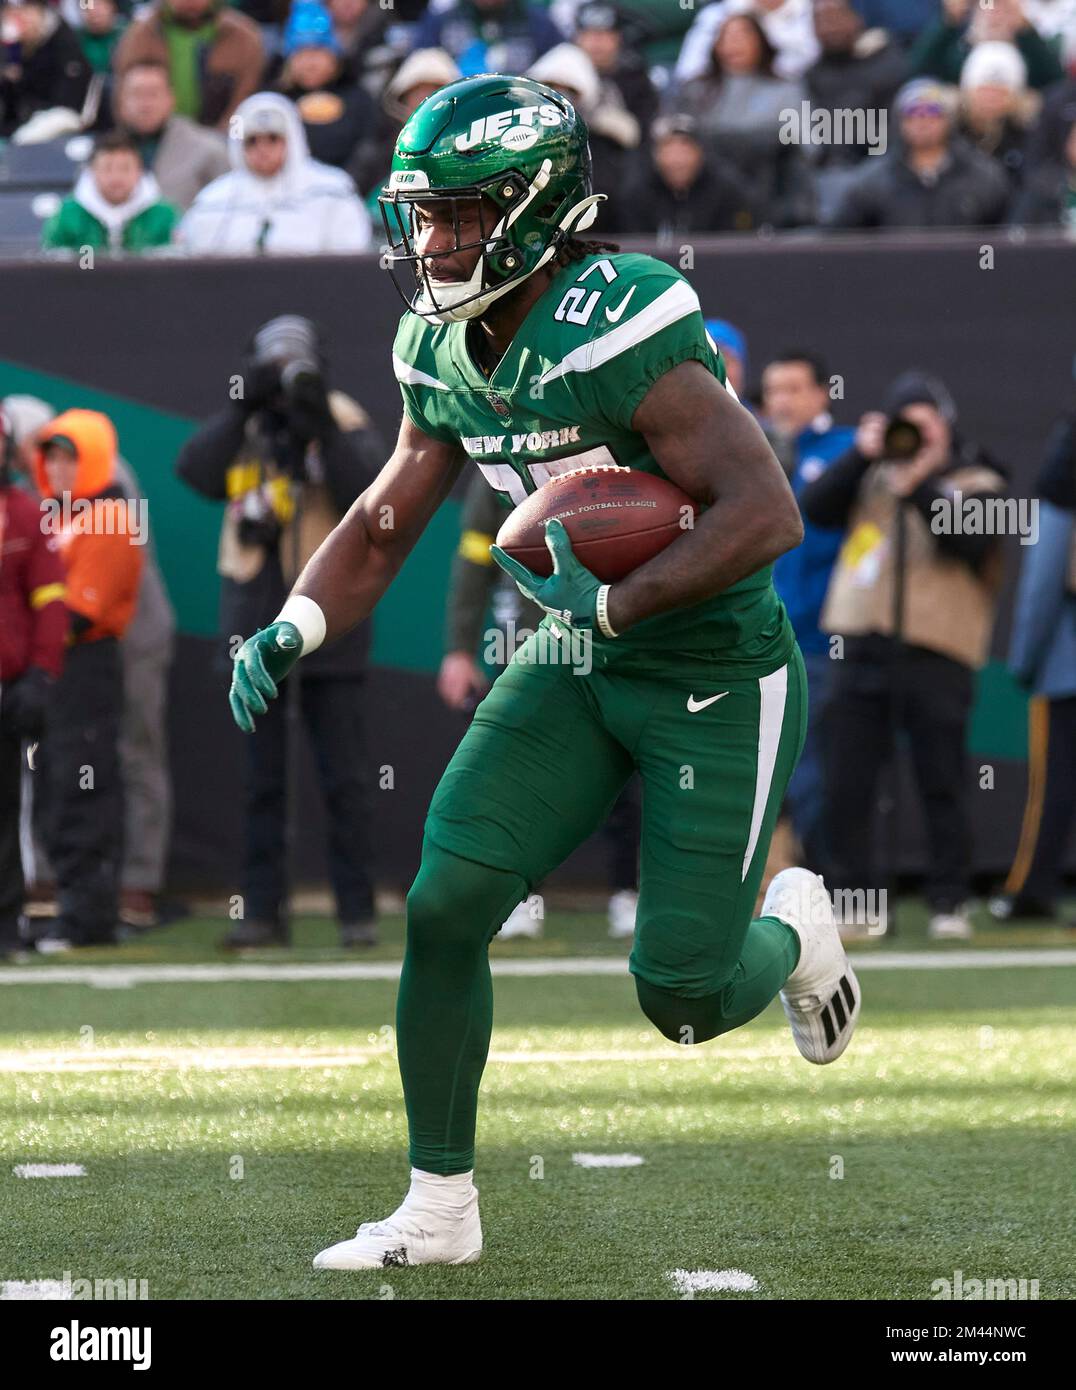 East Rutherford, NJ. 18/12/2022, New York Jets running back Zonovan Knight  (27) looks for running room during a NFL game against the Detroit Lions on  Sunday, Dec. 18, 2022 in East Rutherford,